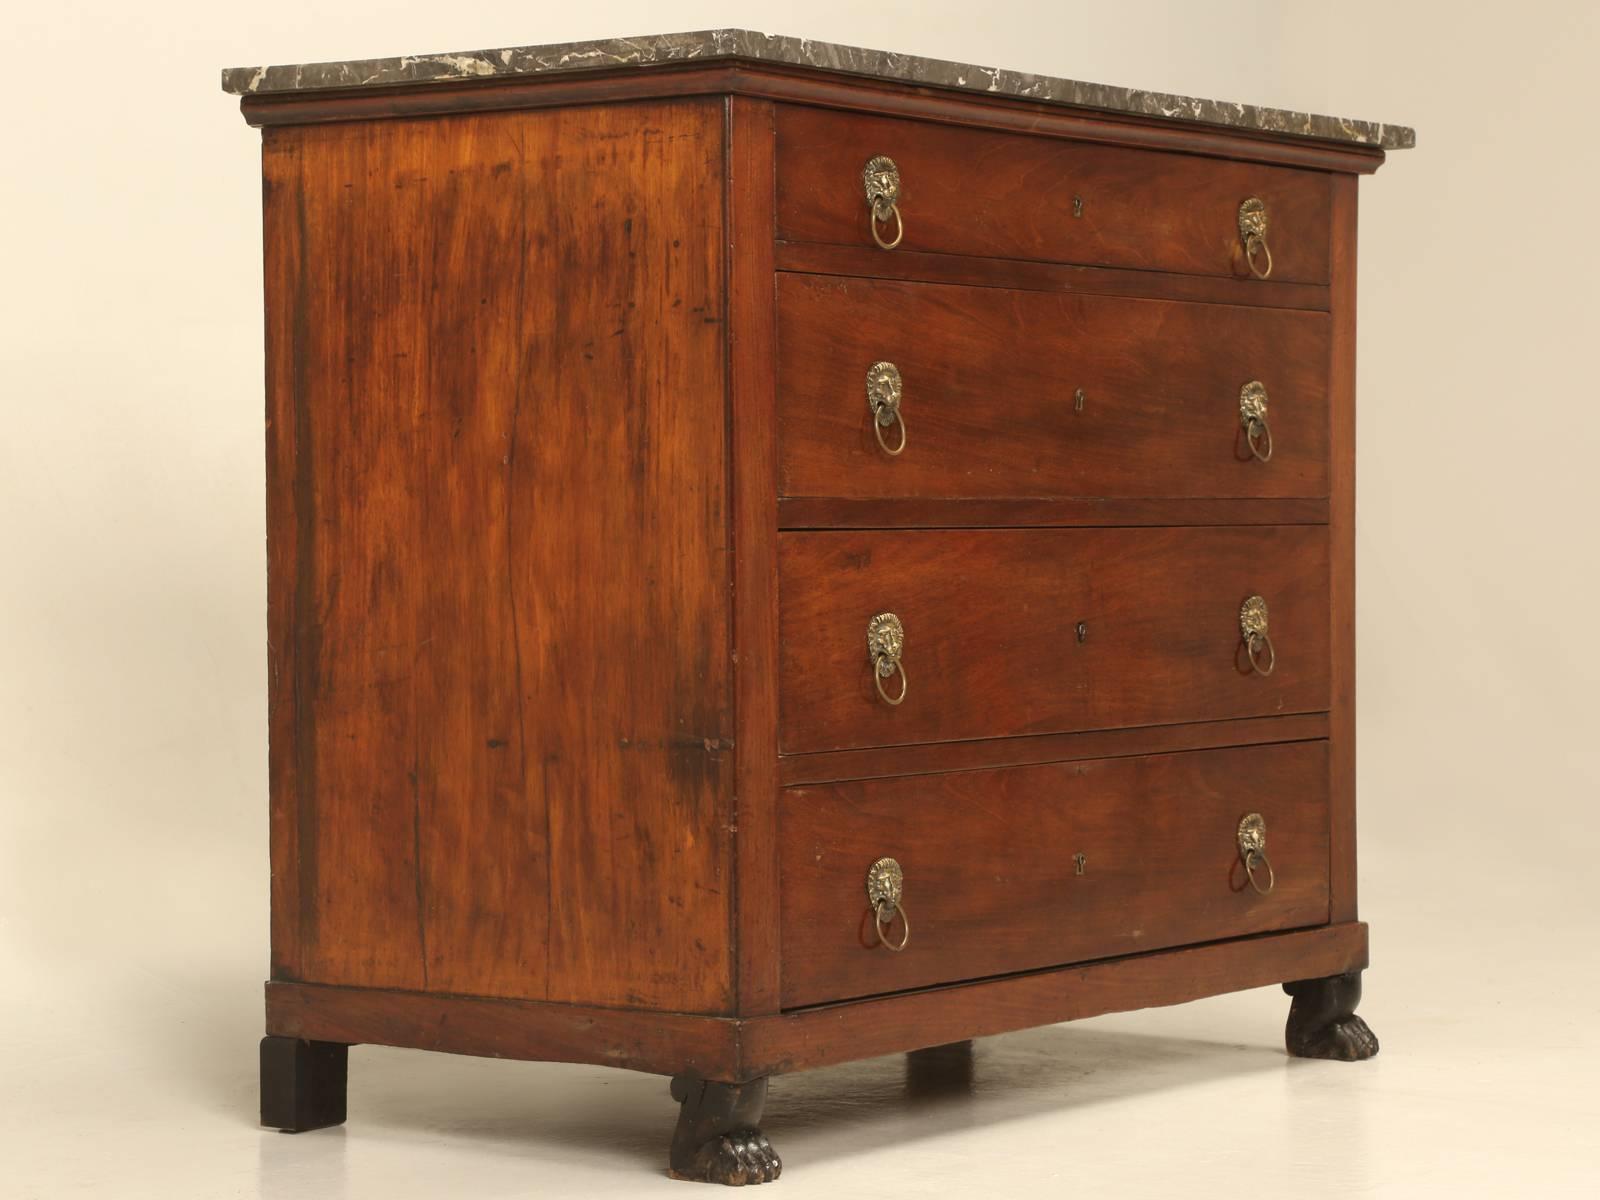 Antique French Walnut Commode with great feet, that we found not too far from the Old Plank warehouse in Toulouse.
We decided not to restore the exterior finish, but rather enhance what was already there and try to save as much of the original